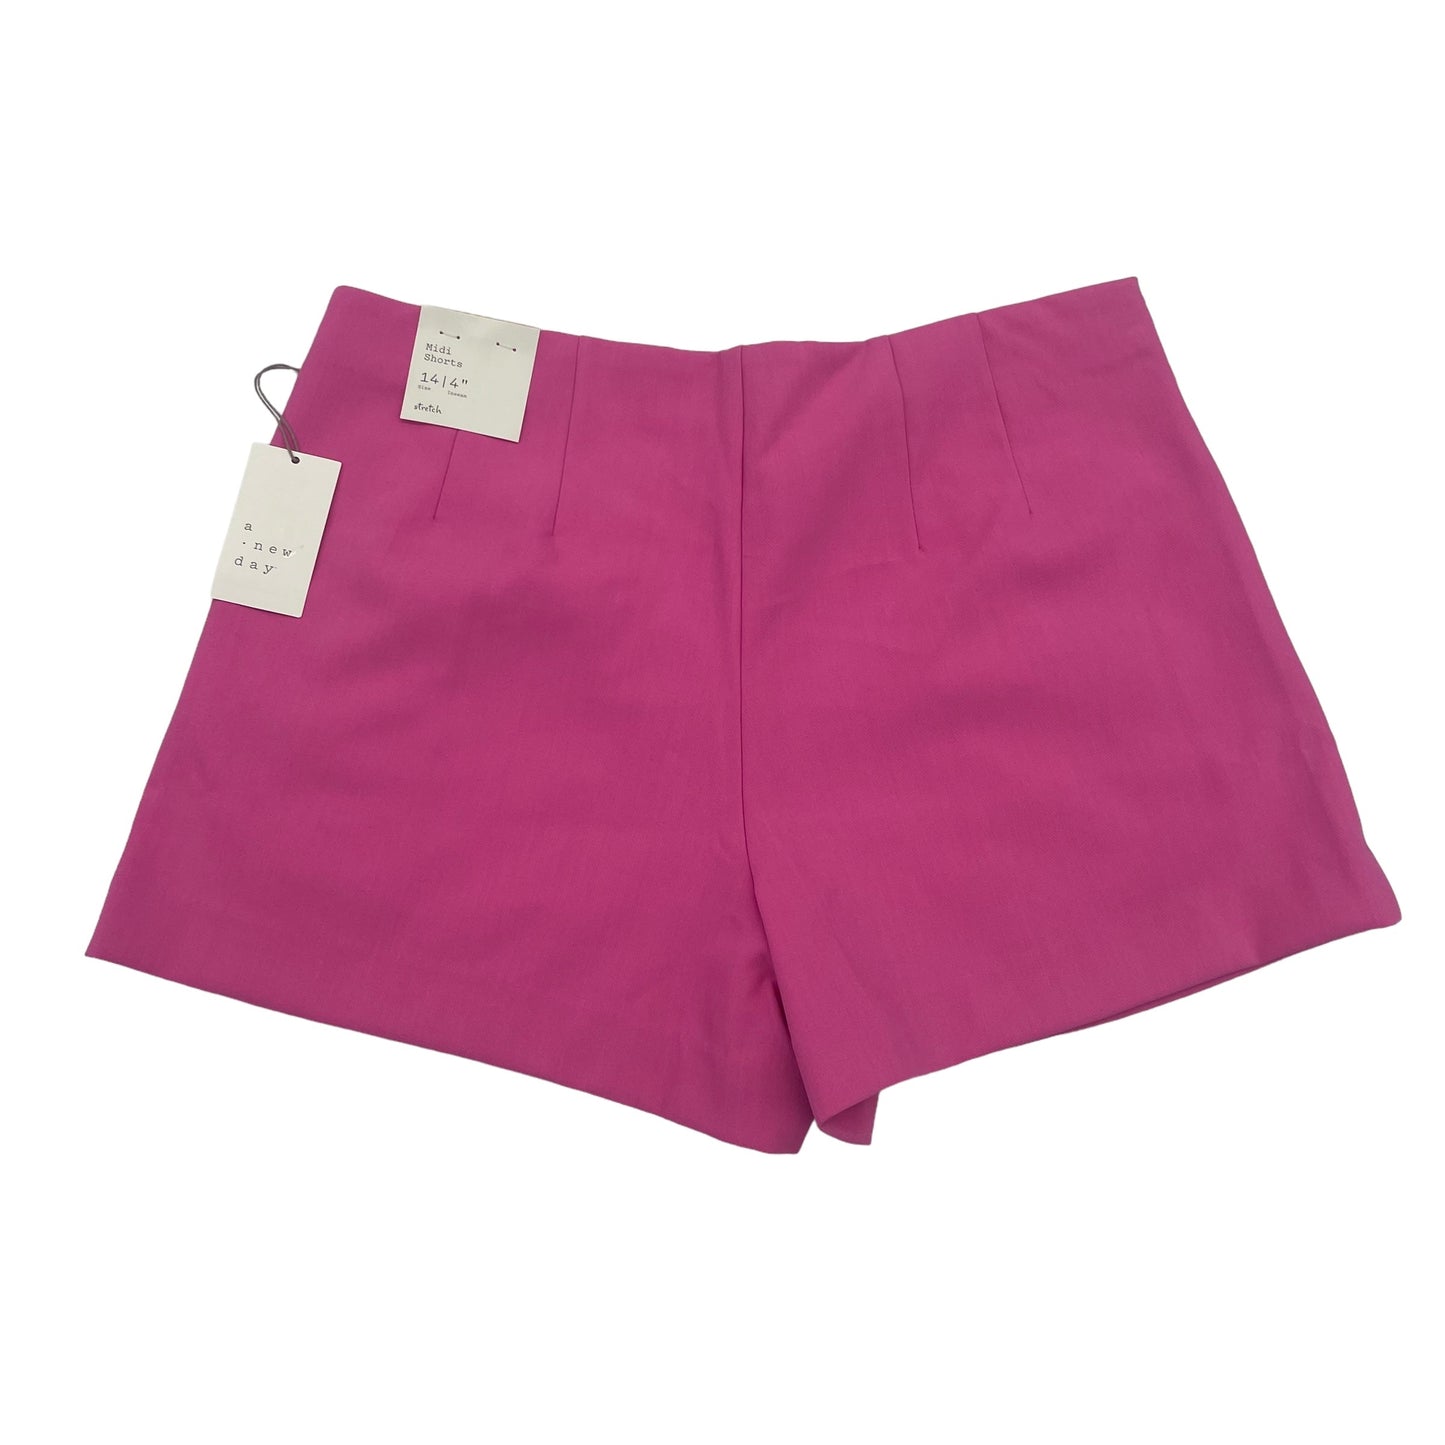 PINK A NEW DAY SHORTS, Size 14